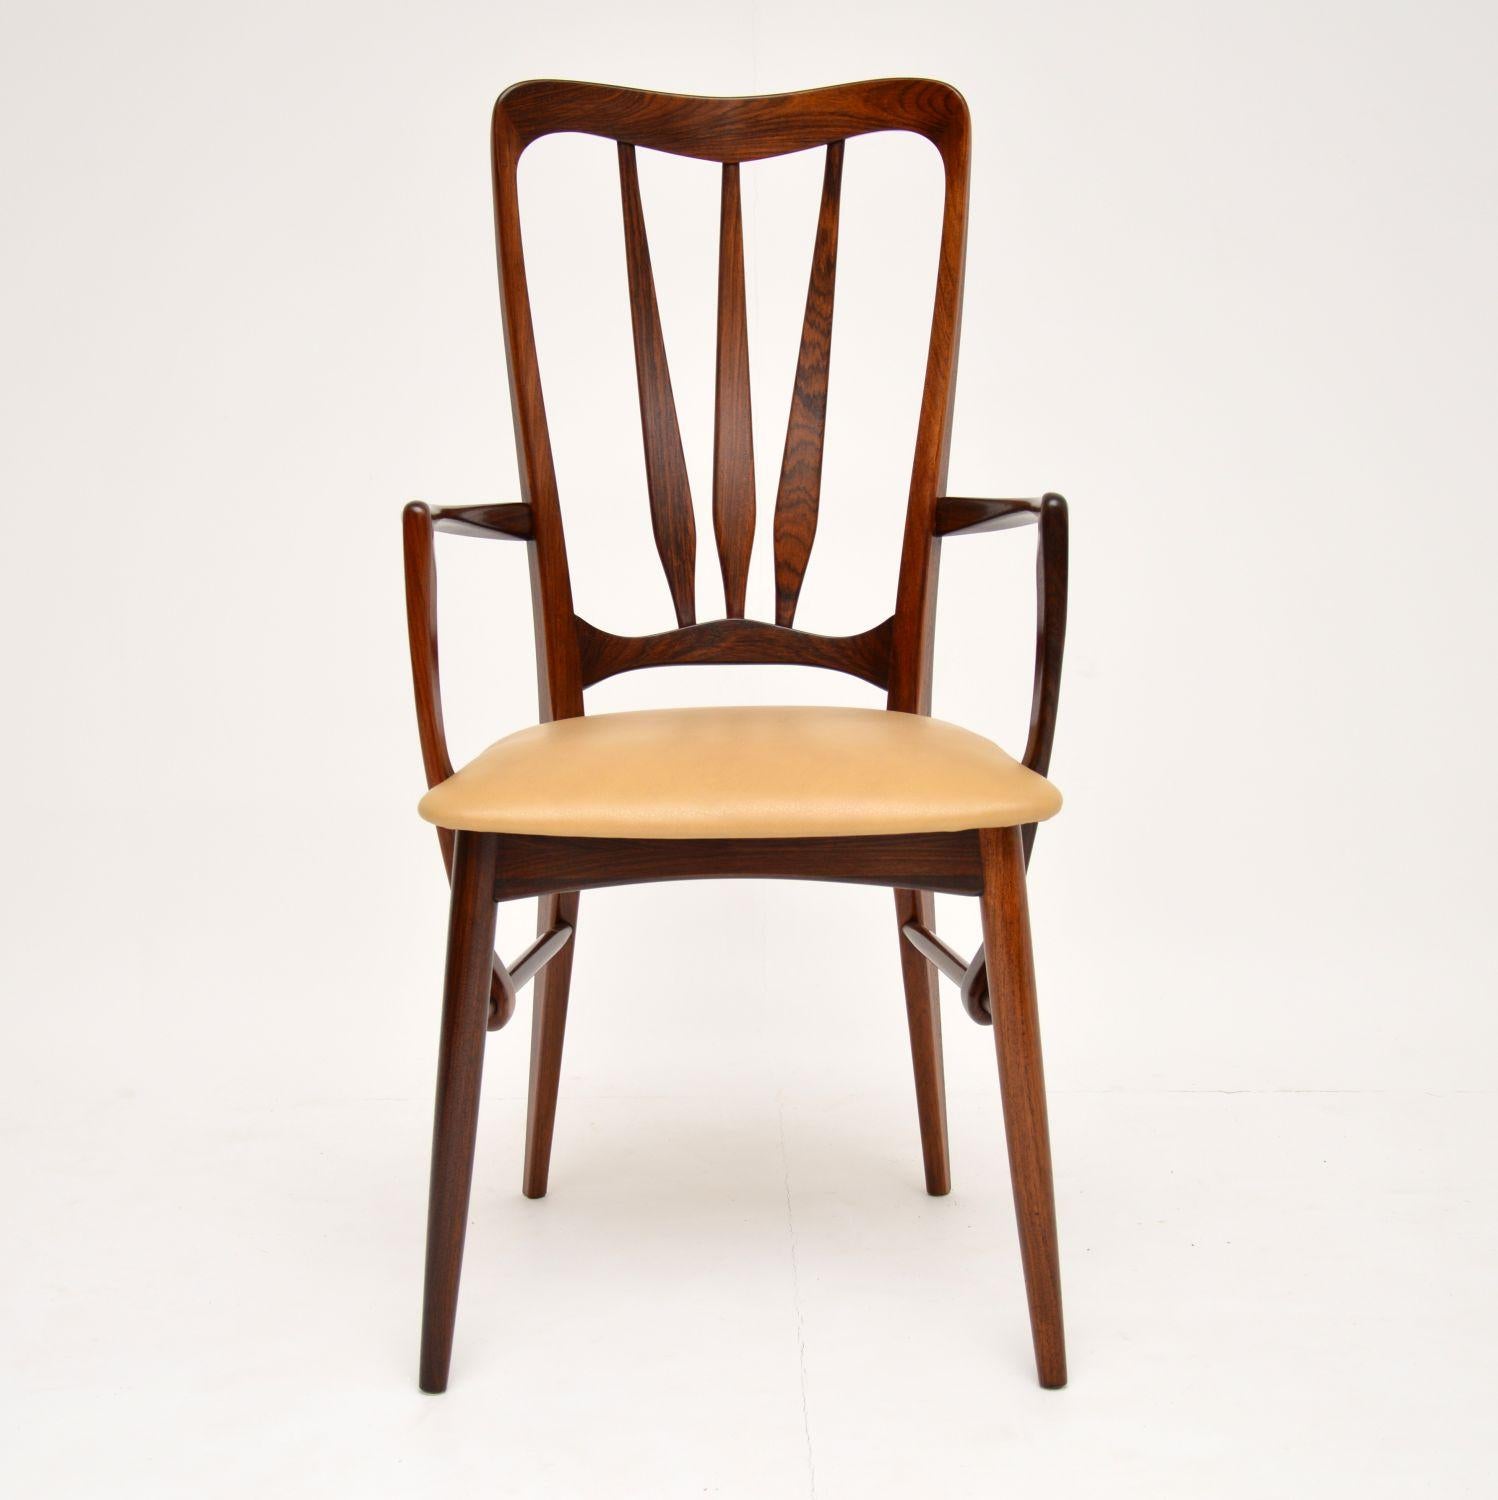 Mid-20th Century 1960s Danish Wood and Leather Dining Chairs by Nils Kofoed